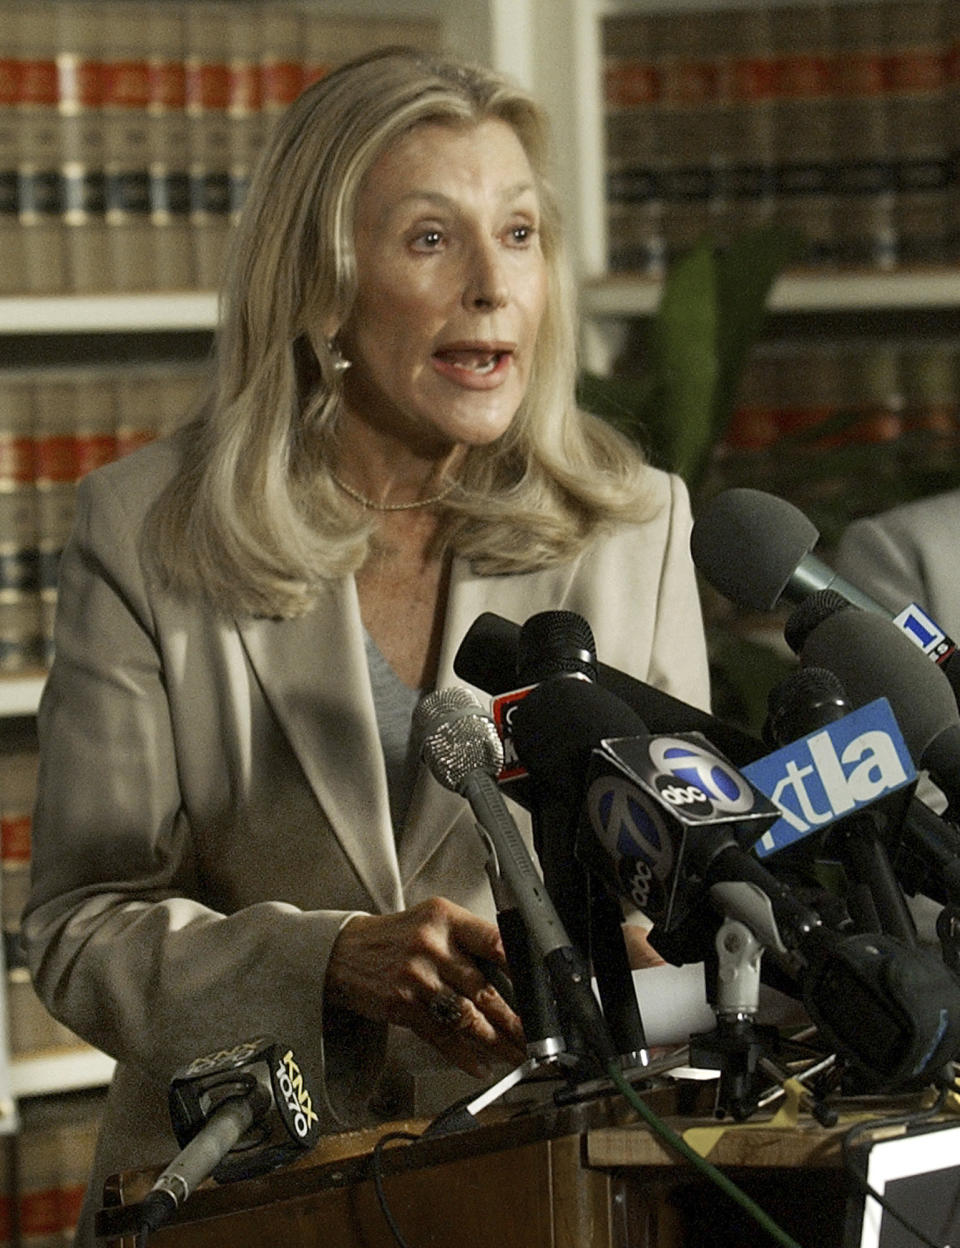 FILE - In this Monday, Sept. 15, 2003 file photo, Ramona Ripston, executive director of American Civil Liberties Union of Southern California, speaks at a news conference in reaction to the announcement that the 9th U.S. Circuit Court of Appeals postponed California's Oct. 7 gubernatorial recall election ruling the historic vote cannot proceed as scheduled because some votes would be cast using outmoded punch-card ballot machines, in Los Angeles. Ripston, a longtime activist who built up the American Civil Liberties Union of Southern California into a major organization, has died at age 91. Ripston died Saturday, Nov. 3, 2018, at her home after several years of illness, said David Colker, a spokesman for the chapter. (AP Photo/Ric Francis, File)